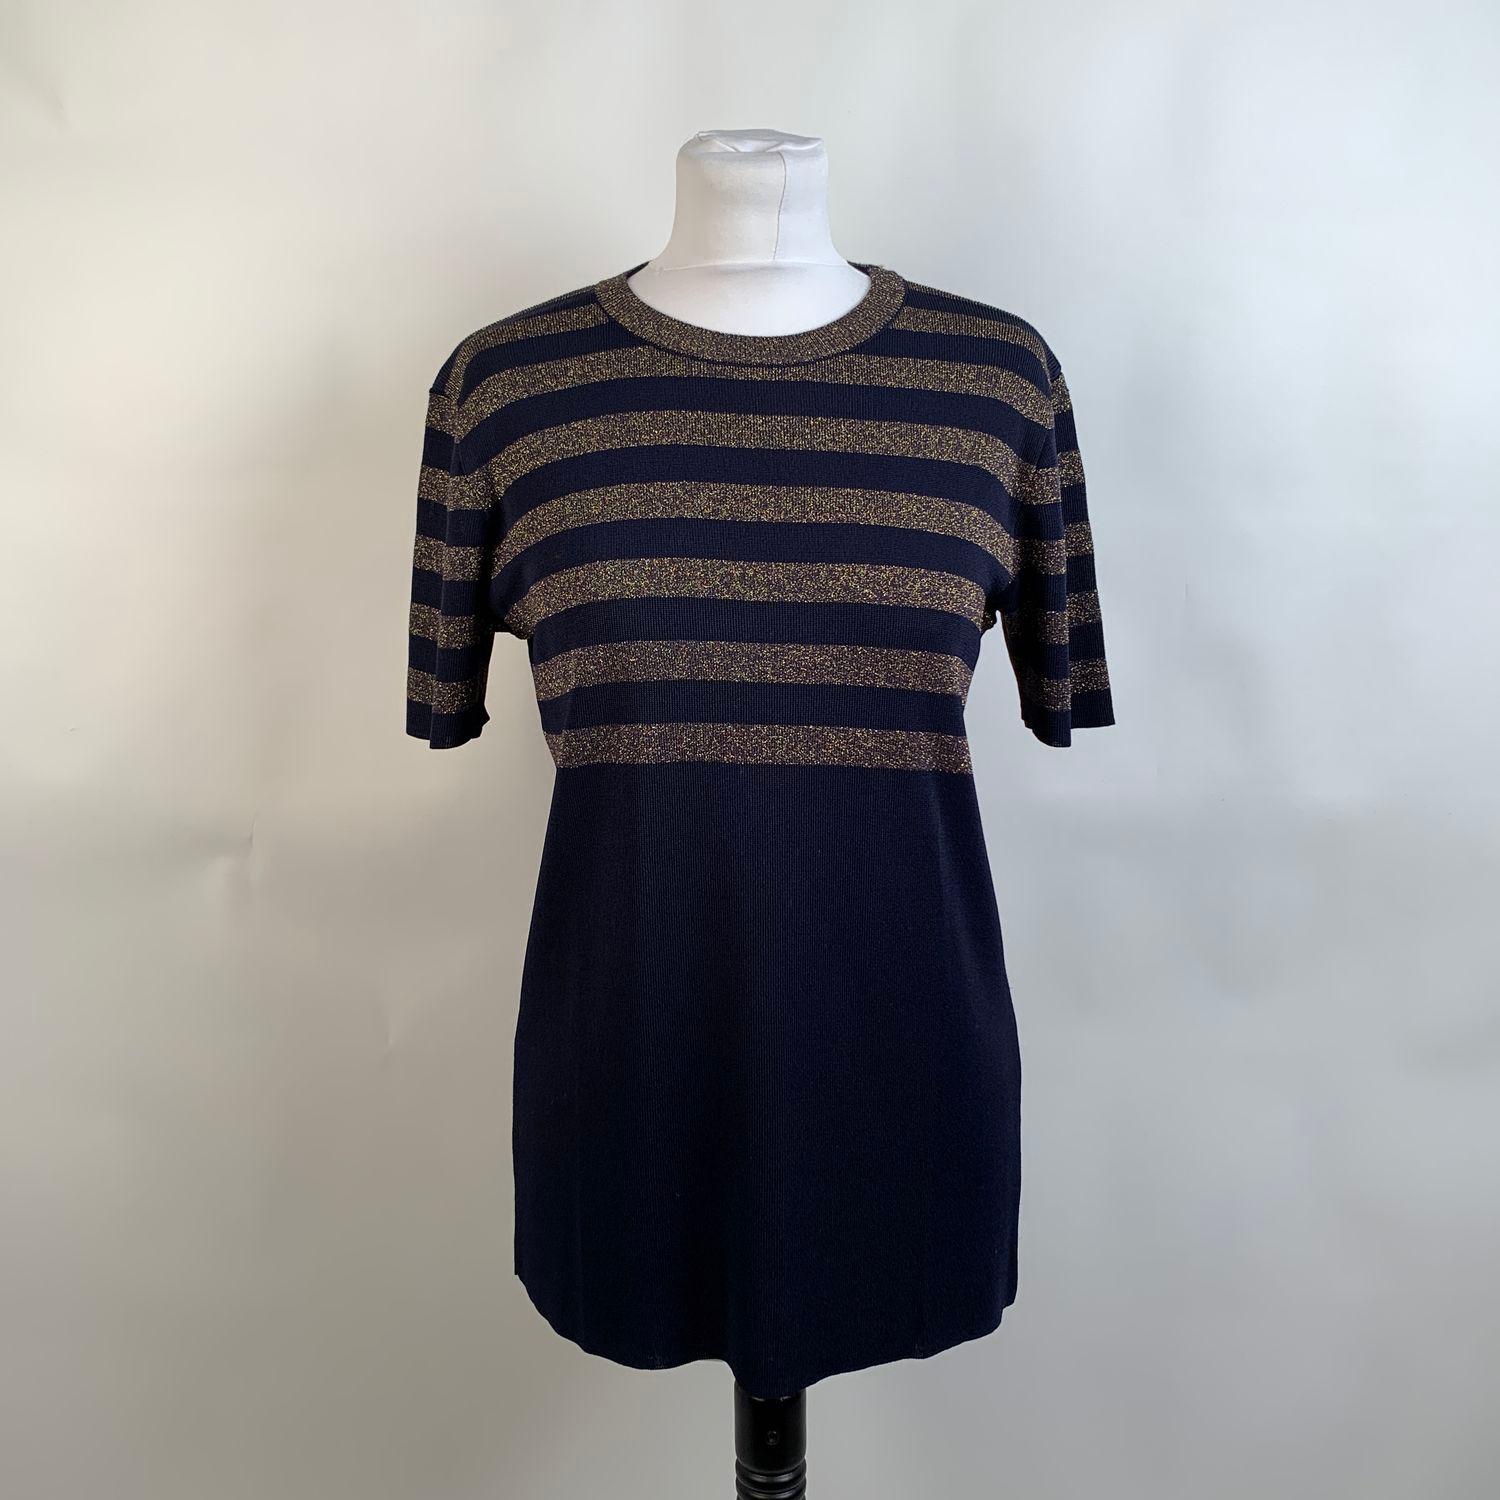 Vintage Yves Saint Laurent navy blue short sleeve jumper. Gold tone stripes detailing on the upper part. Crew neckline. Composition: 84% viscose, 16% polyester. Size: 42 FR (The size shown for this item is the size indicated by the designer on the